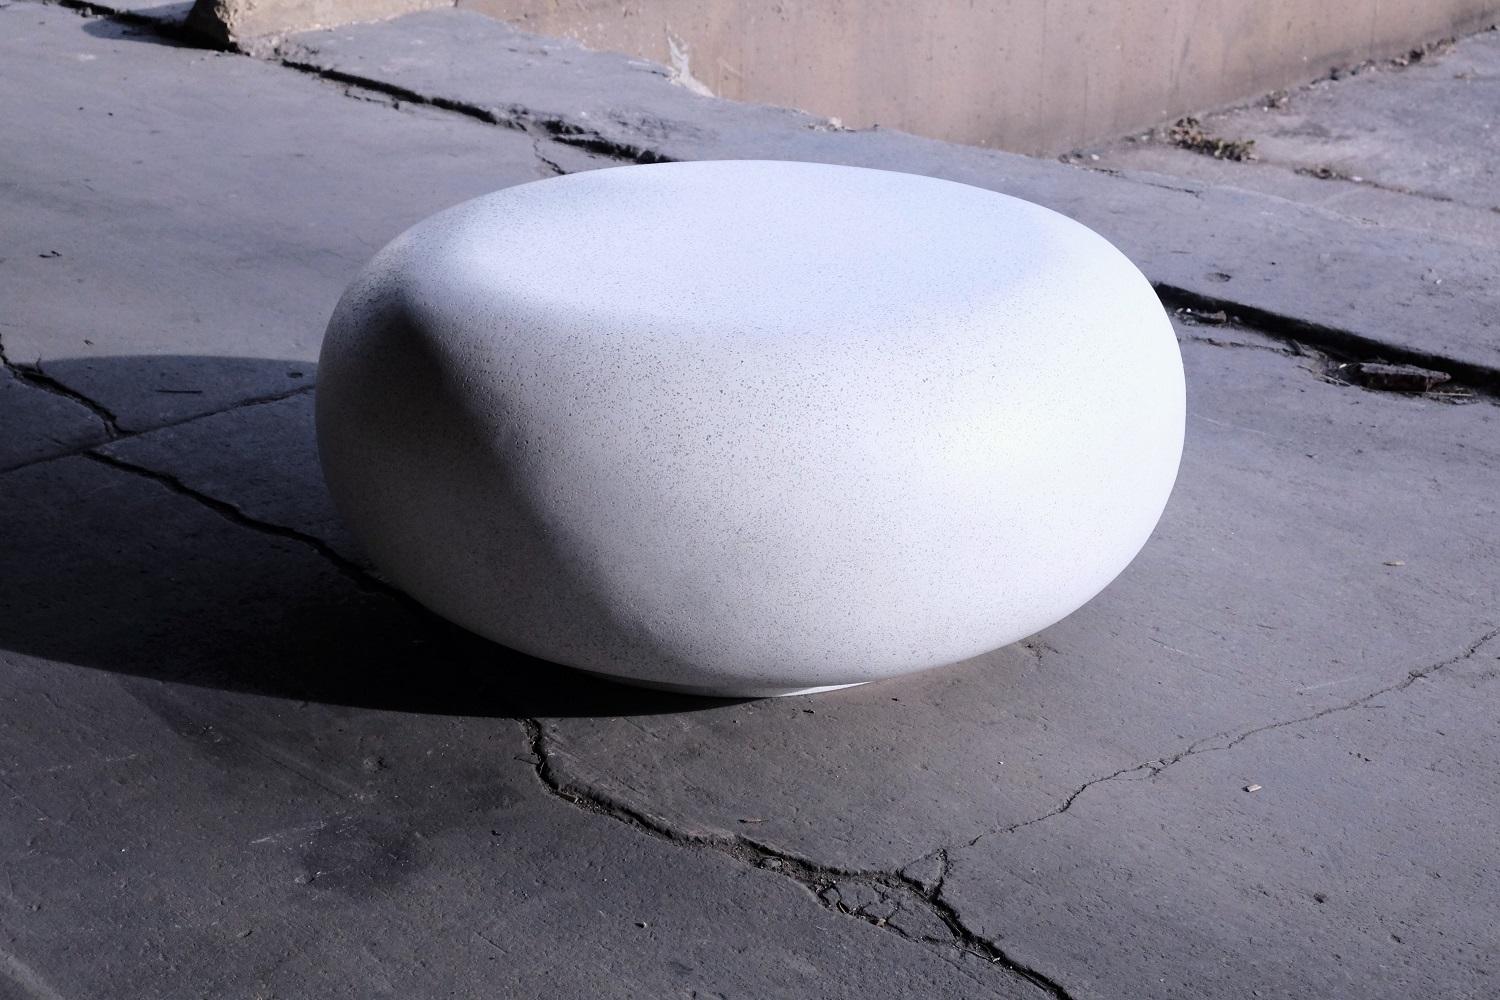 Like a stone from a stream, smoothed for millennia by the passing currents. The fluid potential of natural power emanates from its presence.

Dimensions: Diameter 30 in. (76 cm). Height 15 in. (38 cm). Weight 30 lbs. (14 kg).

Finish color